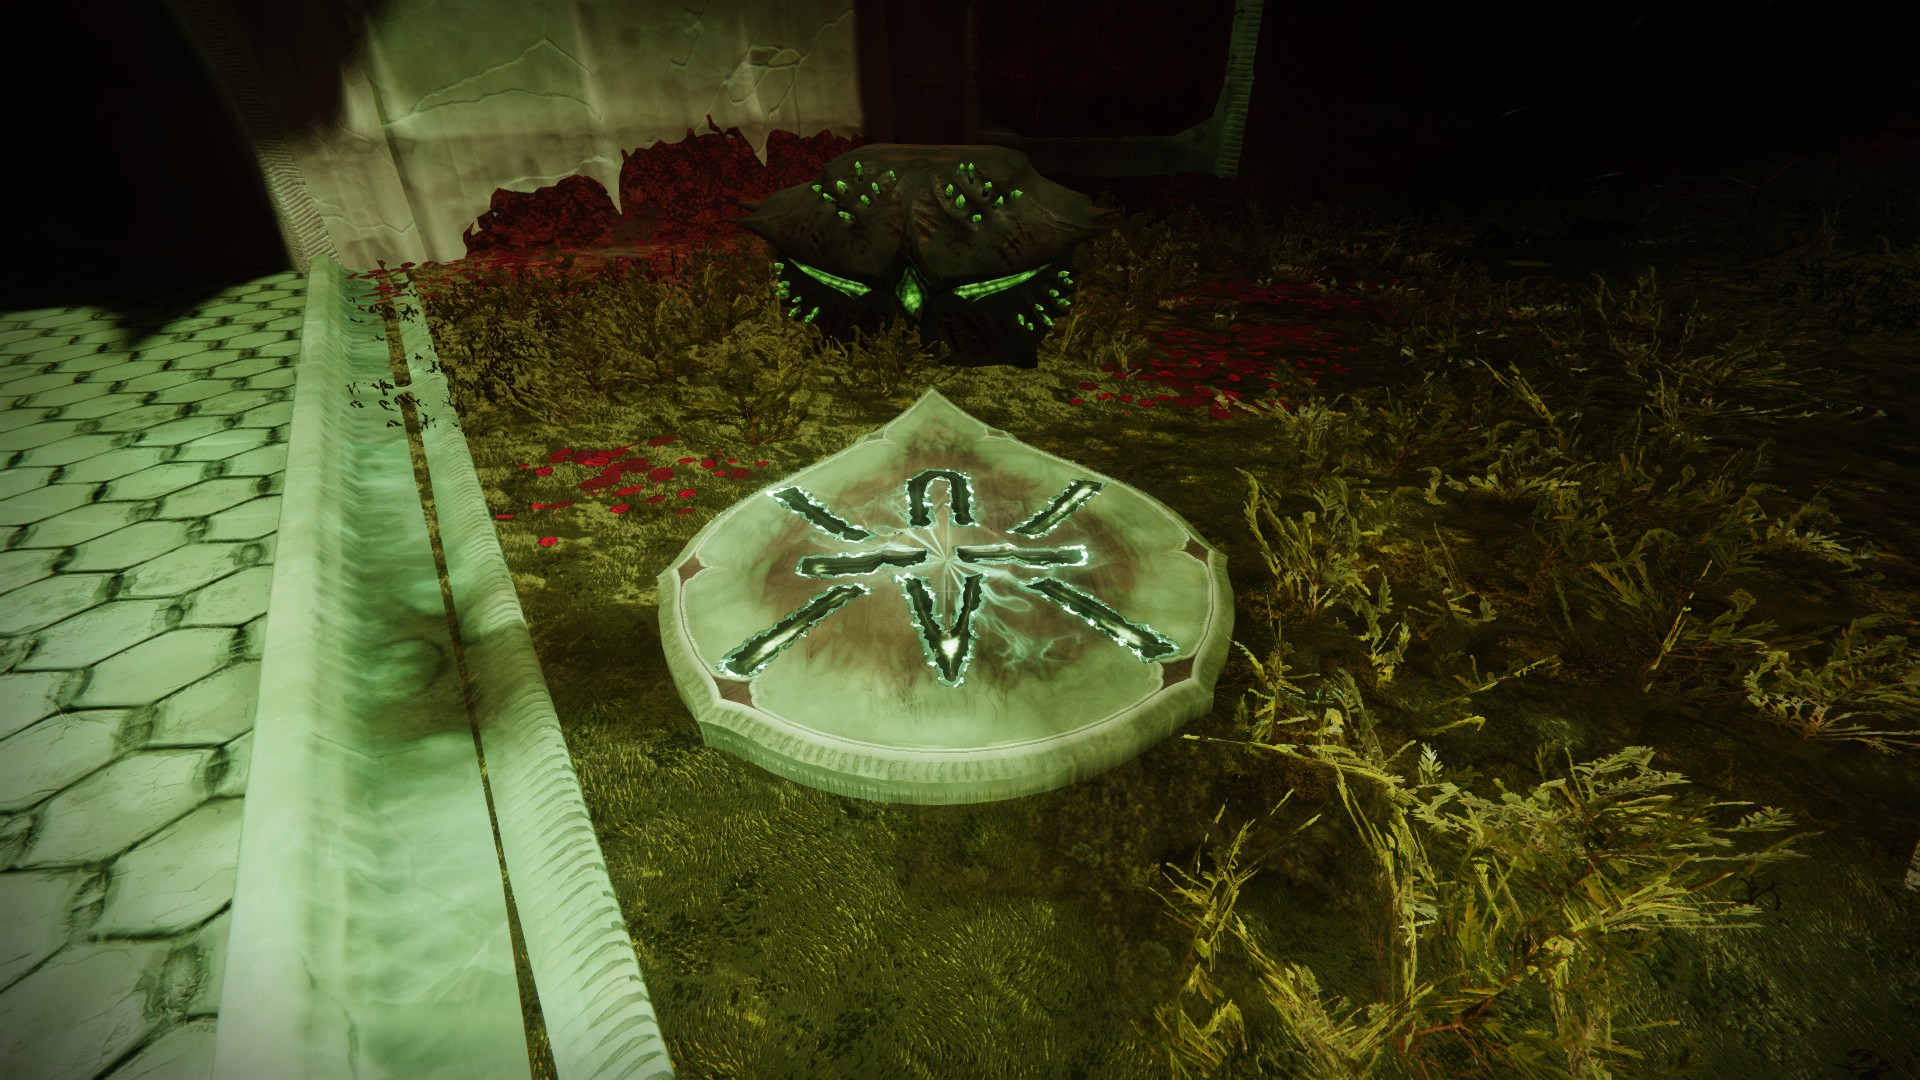 A chest on some grass. There's a Hive Rune that looks like a piece of barbed wire on a plate in front of this chest.